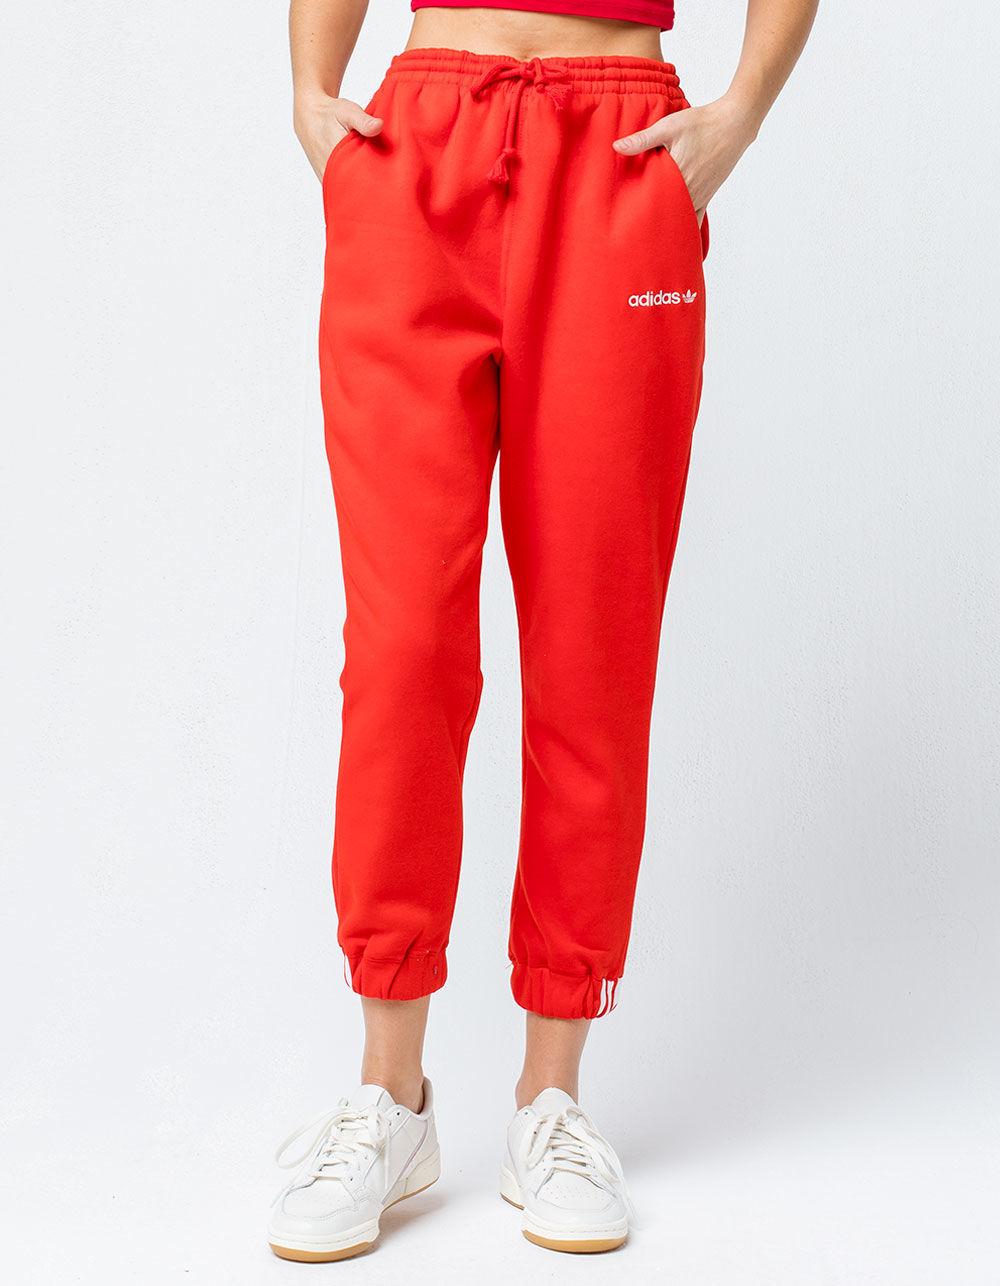 womens red adidas sweatpants coupon 